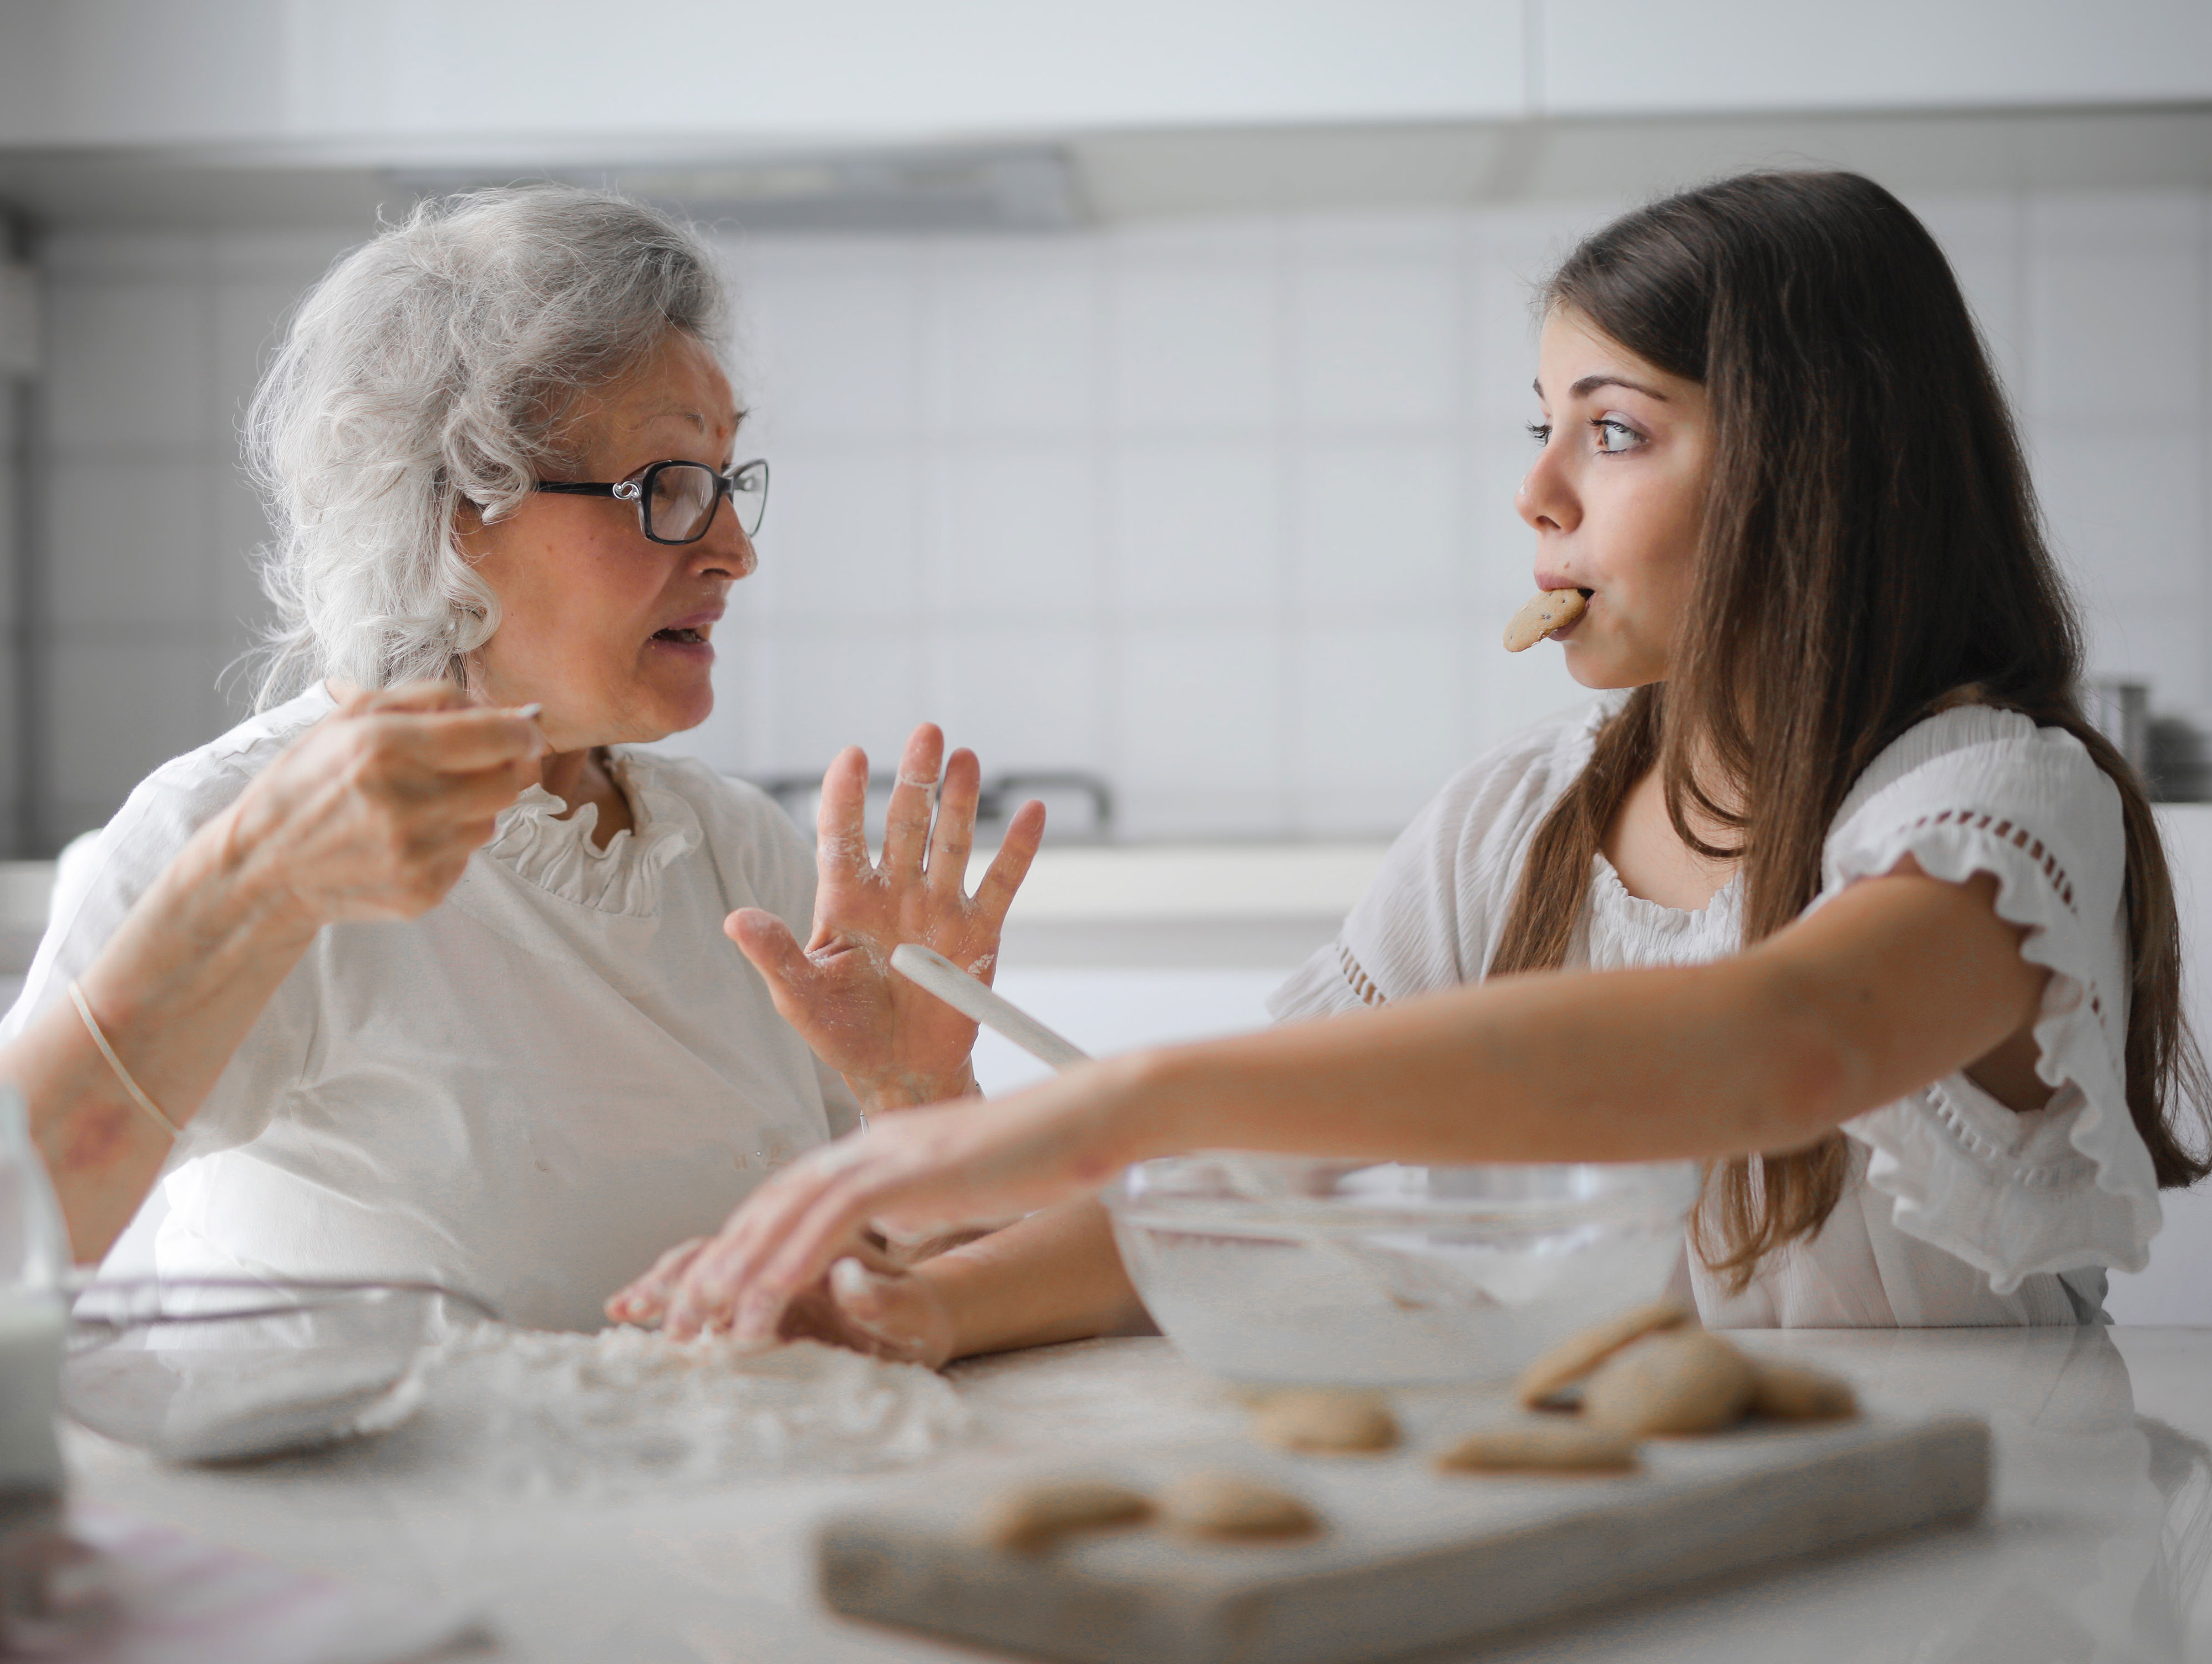 Image credits: https://www.pexels.com/photo/pensive-grandmother-with-granddaughter-having-interesting-conversation-while-cooking-together-in-light-modern-kitchen-3768146/